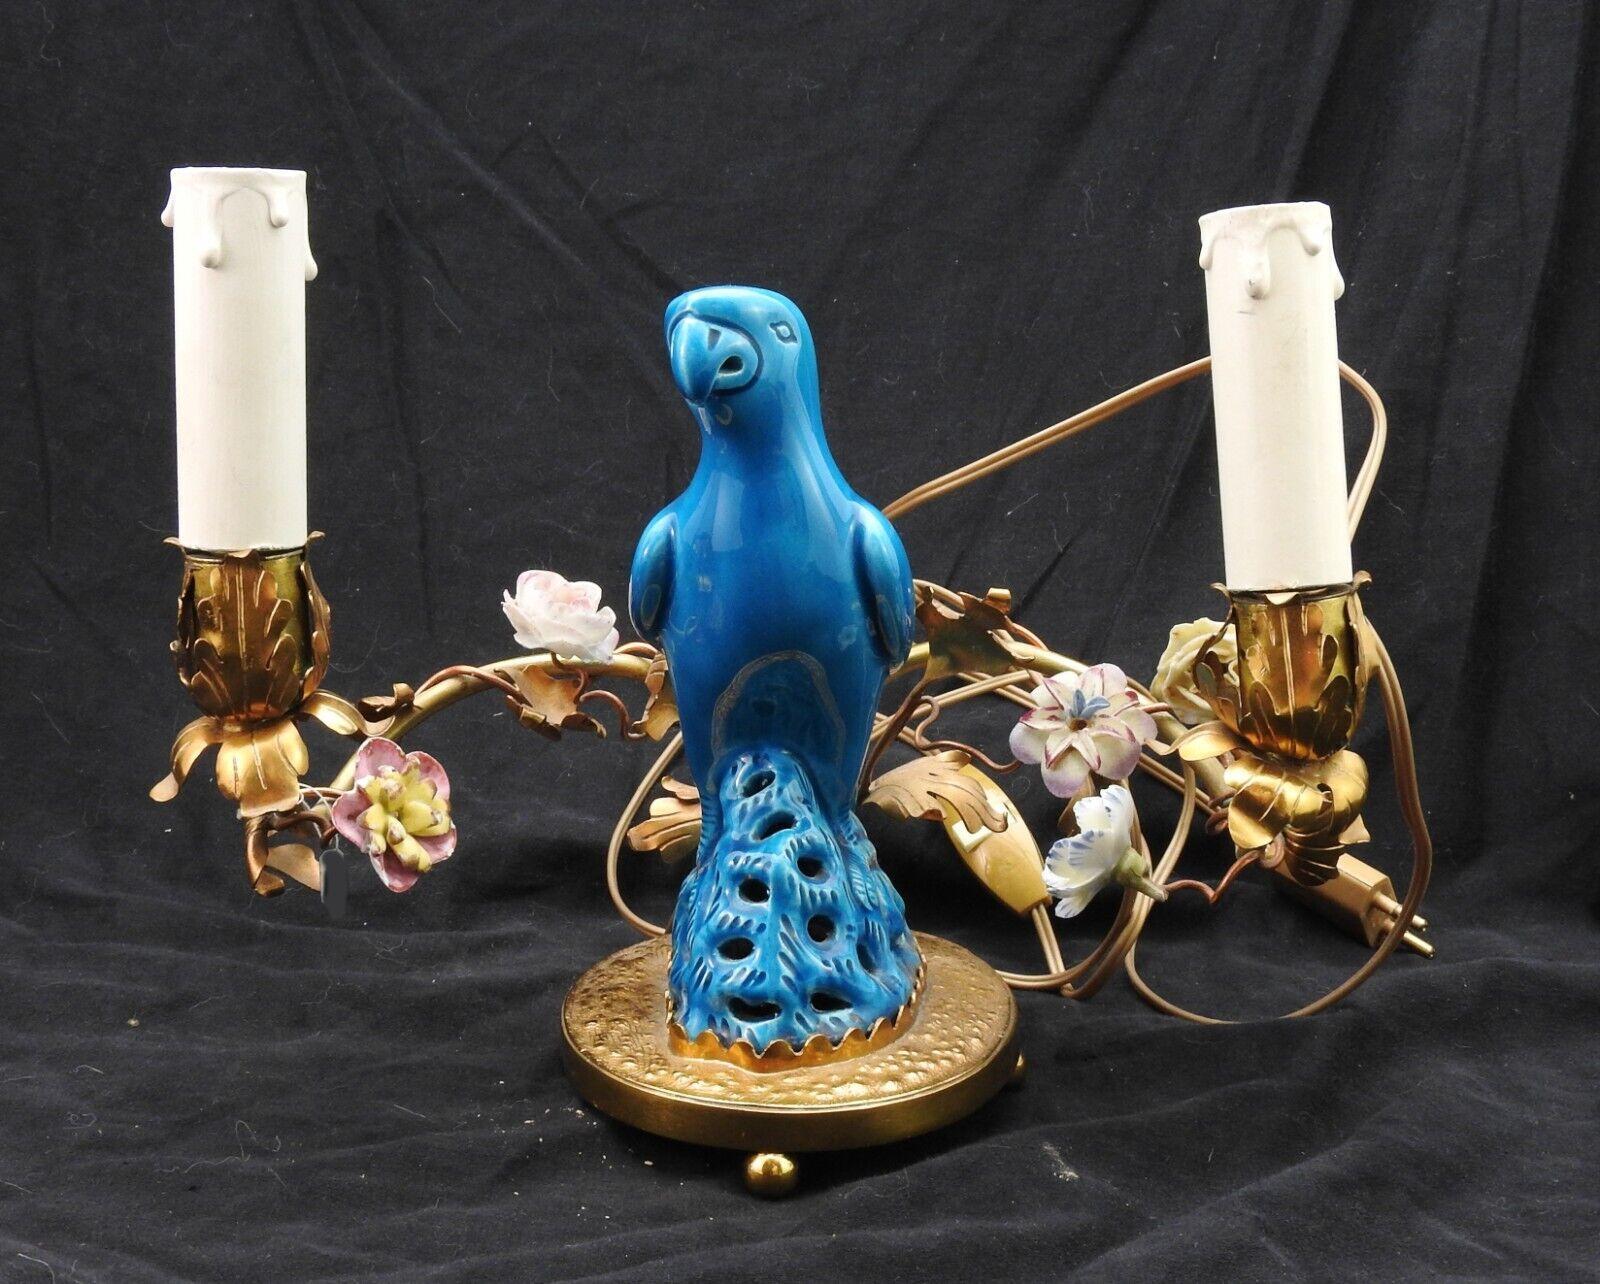 c1890 French Louis XVI style Ormolu/ China Blue Porcelain Parrot Among Porcelain Saxe Flowers and bronze vine Table Lamp. This is a beautiful and highly collectible Lamp.